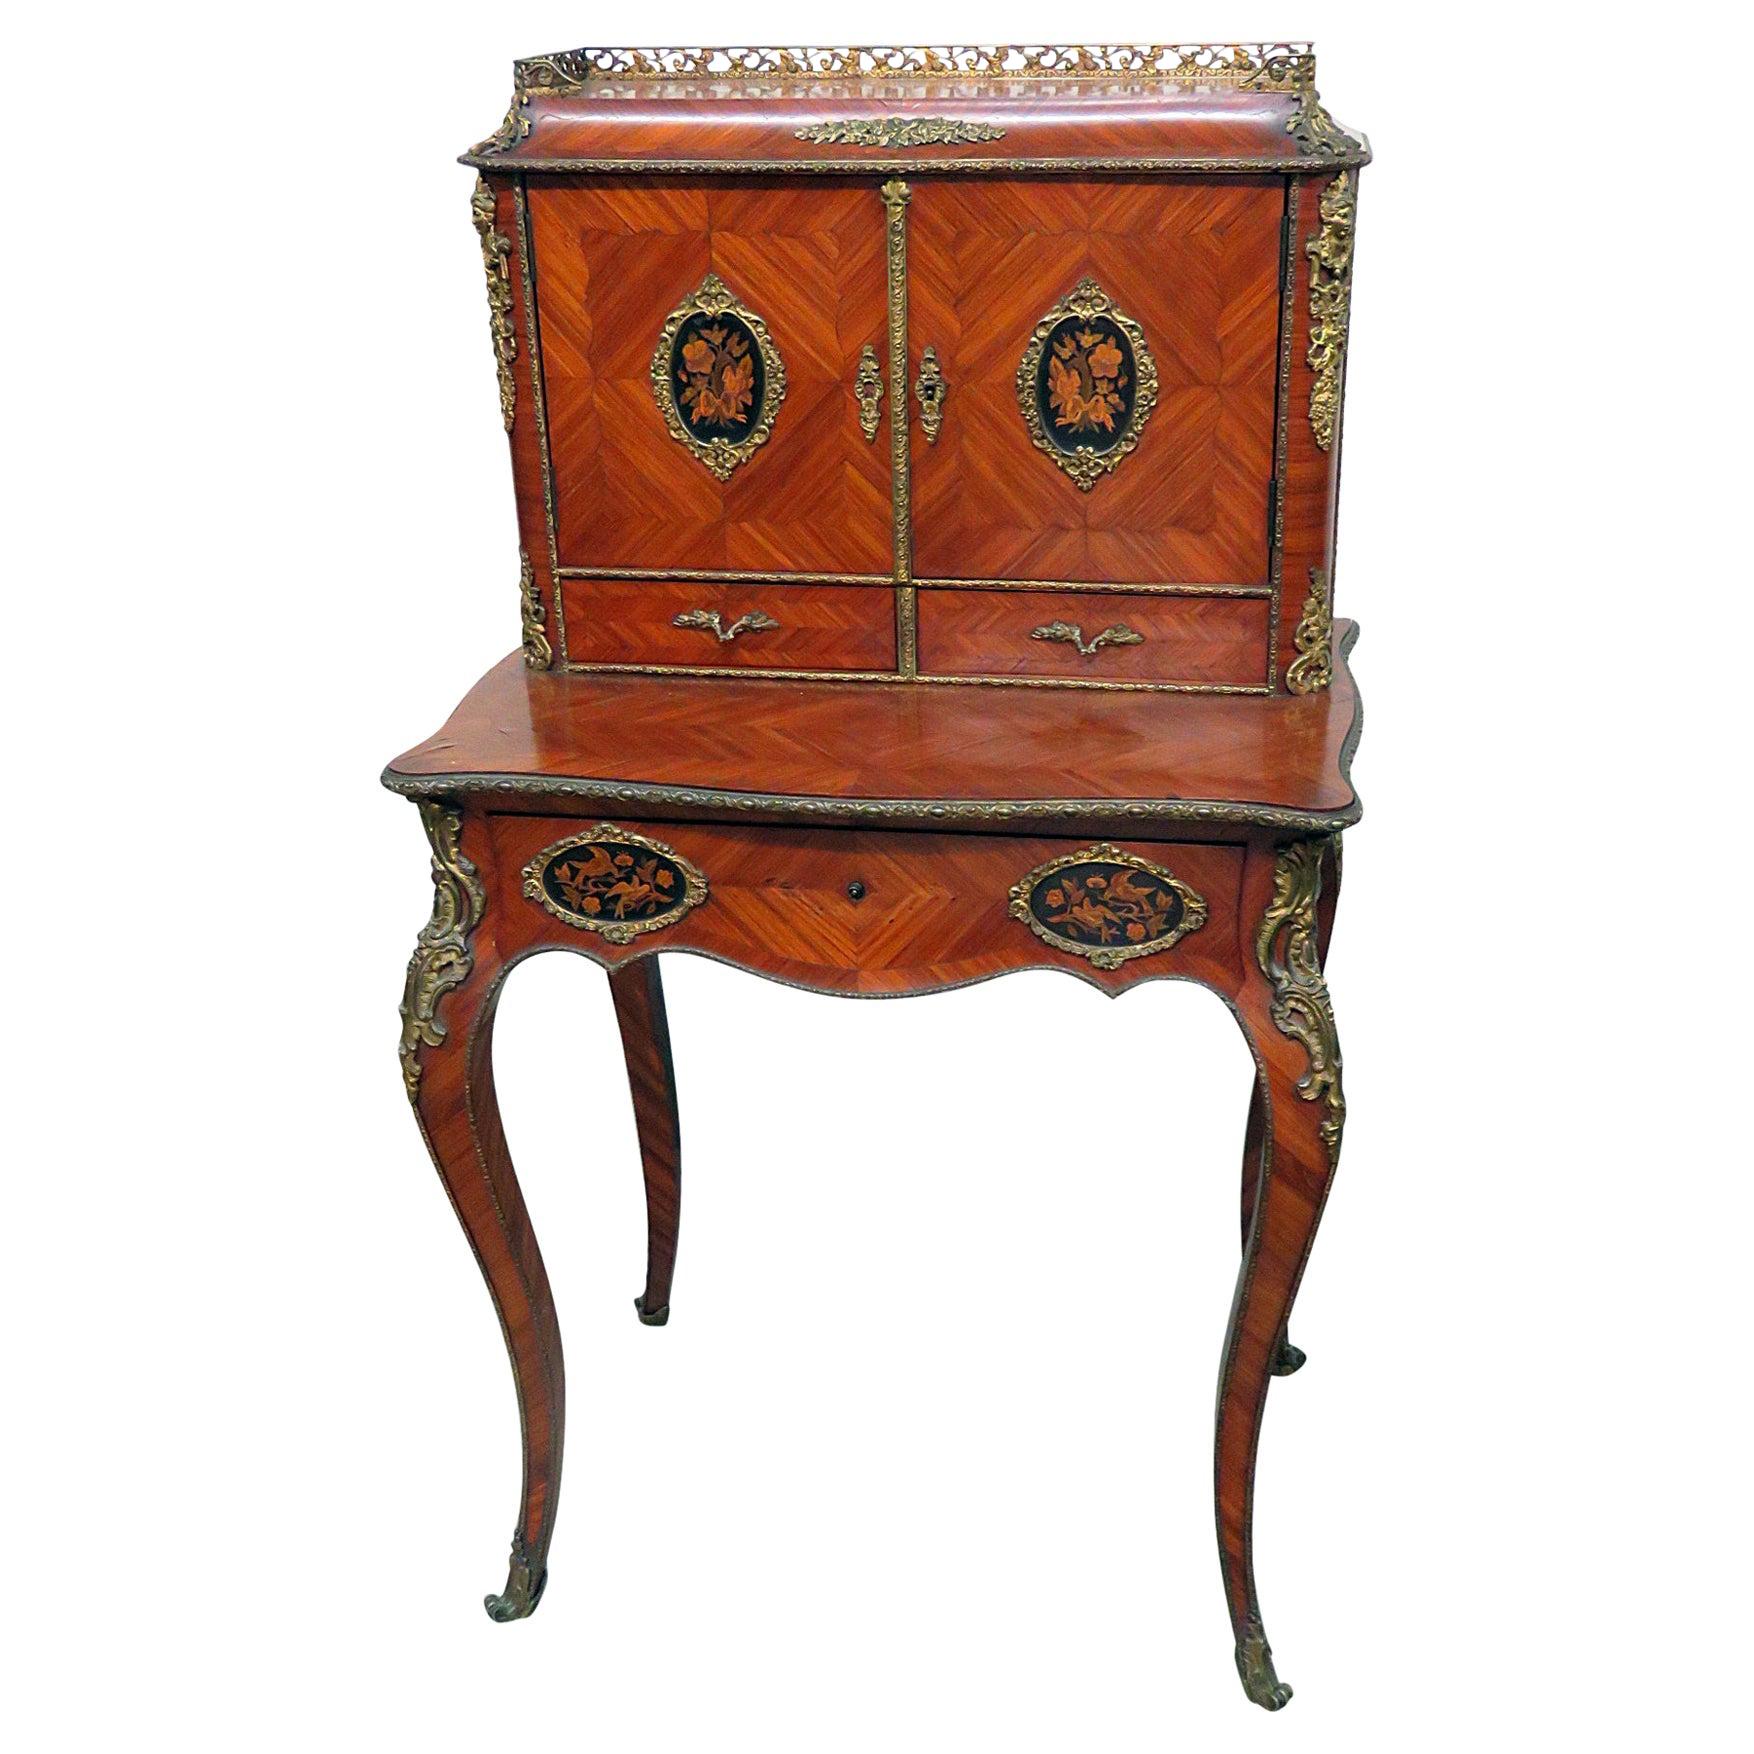 Antique C1870s French Louis XVI Style Inlaid King Wood Ladies Writing Desk